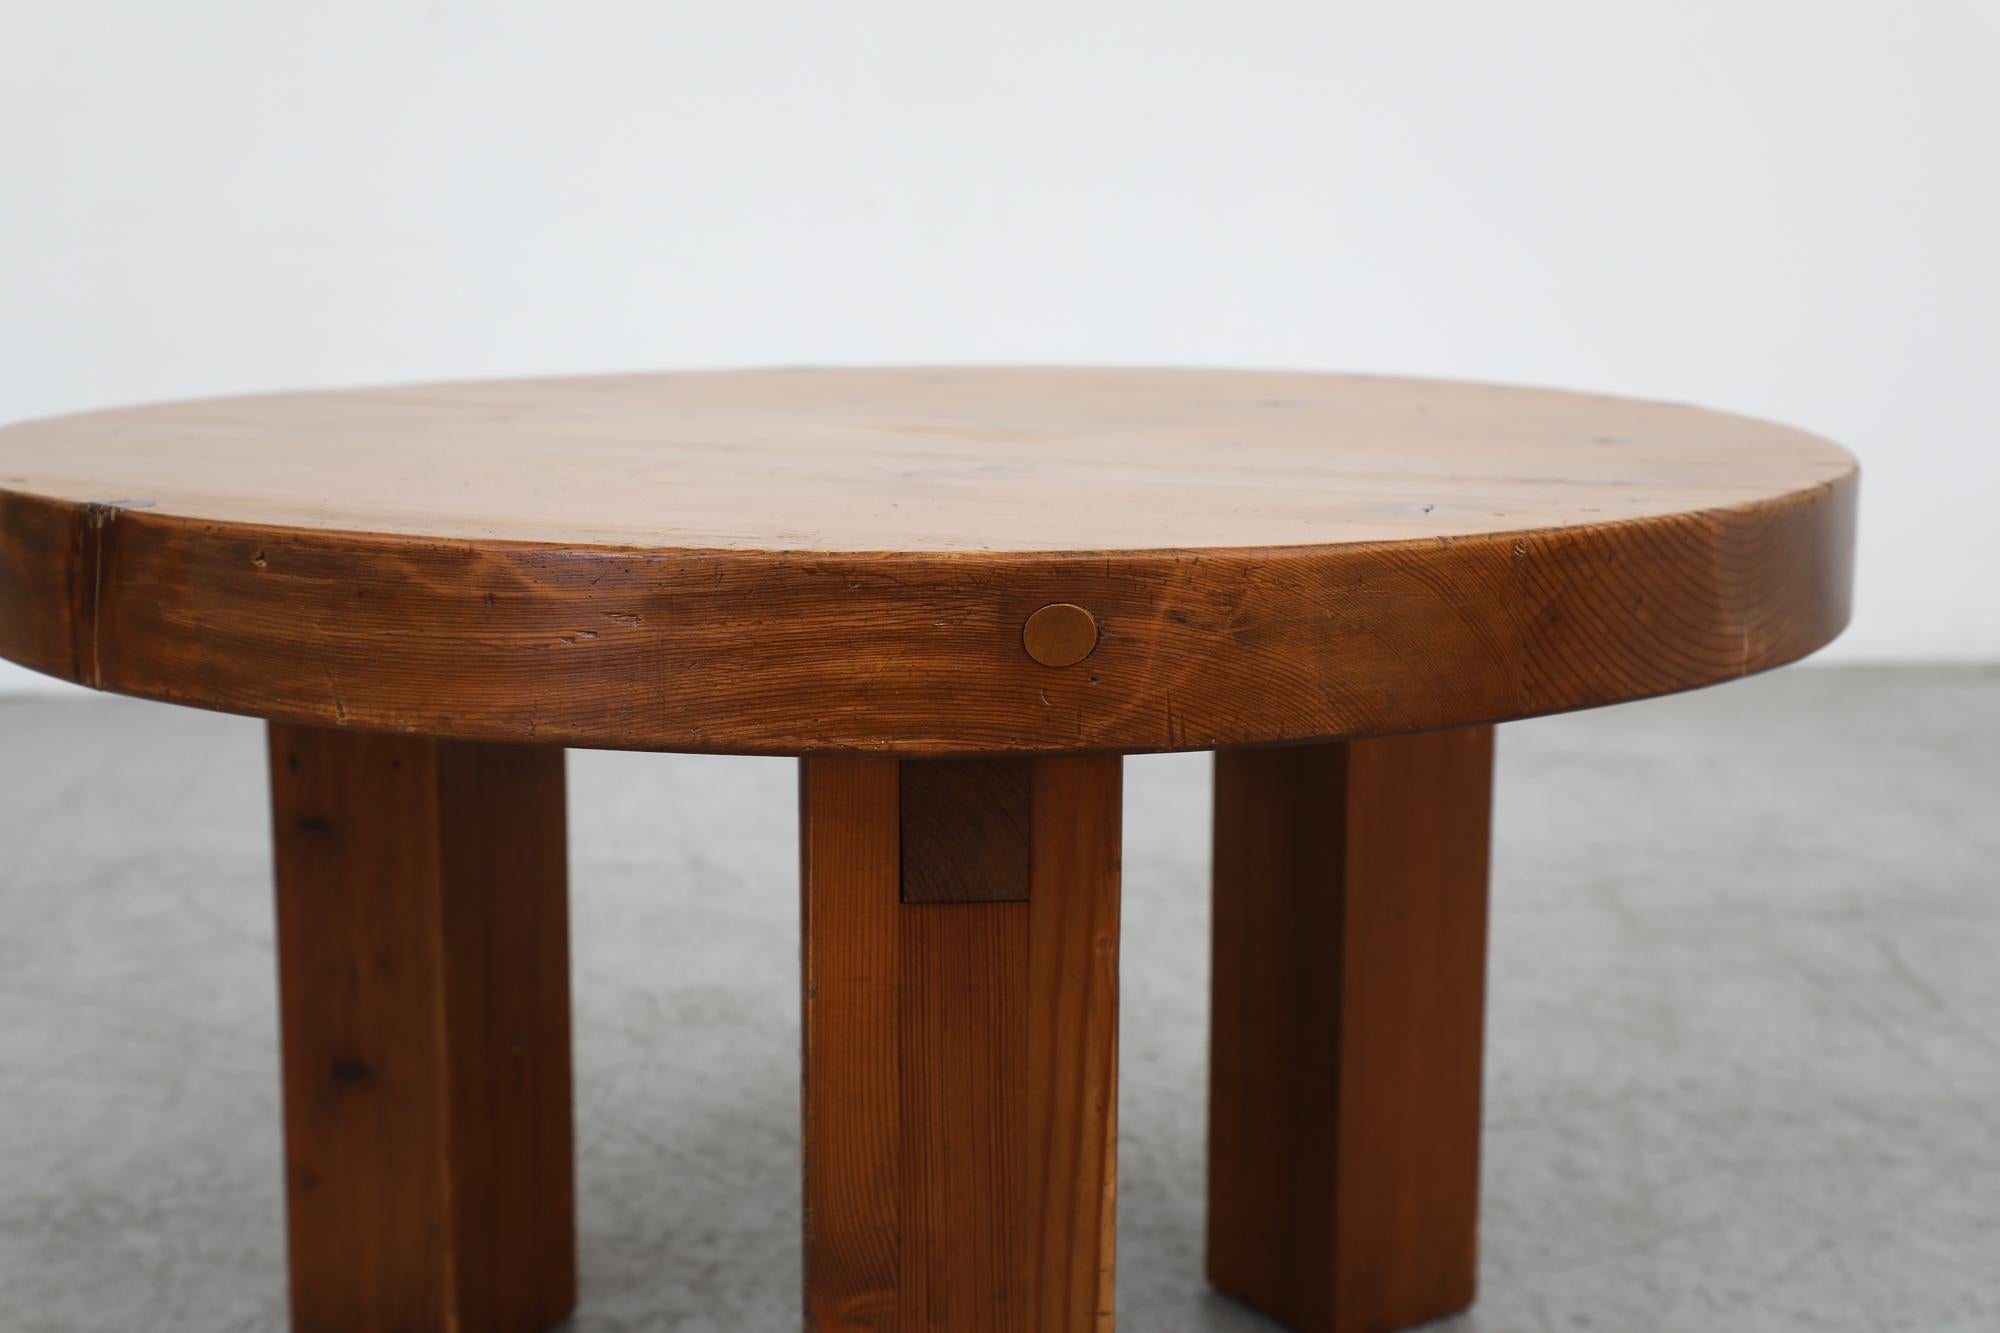 Pierre Chapo Inspired Heavy Pine Brutalist Side Table w/ Round Top & Square Legs In Good Condition For Sale In Los Angeles, CA